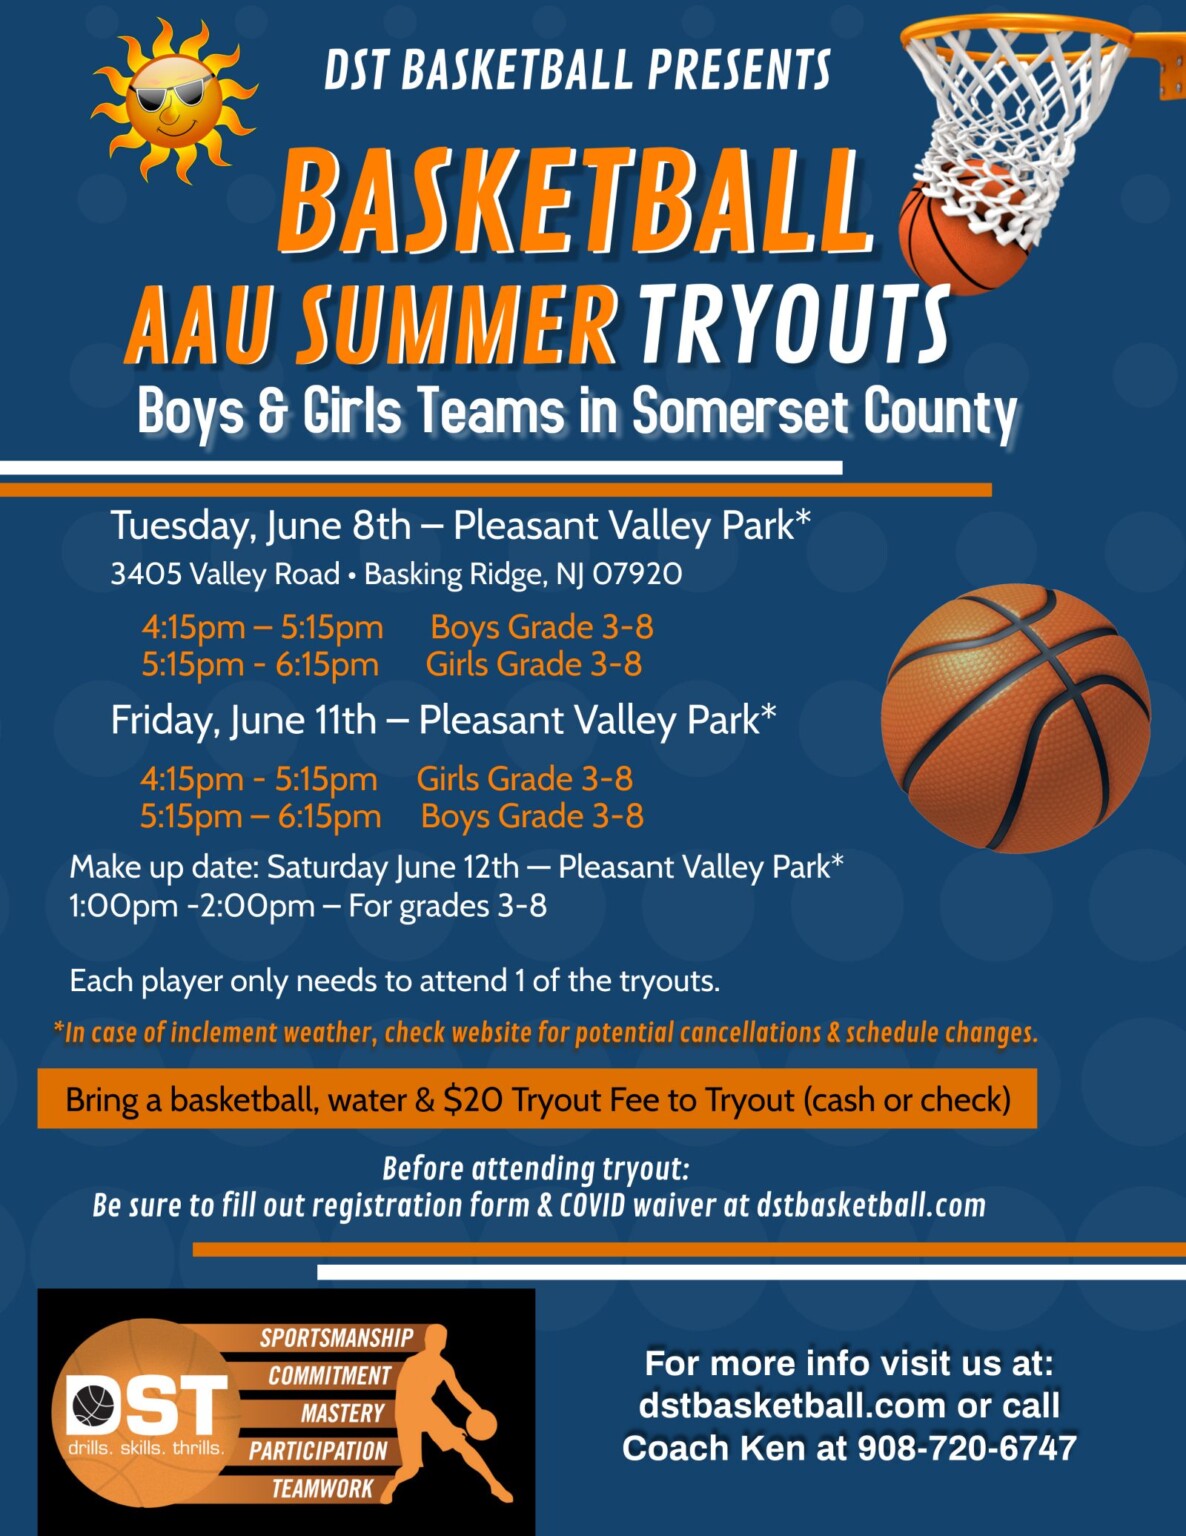 DST Basketball Somerset County AAU Summer Tryouts DST Basketball